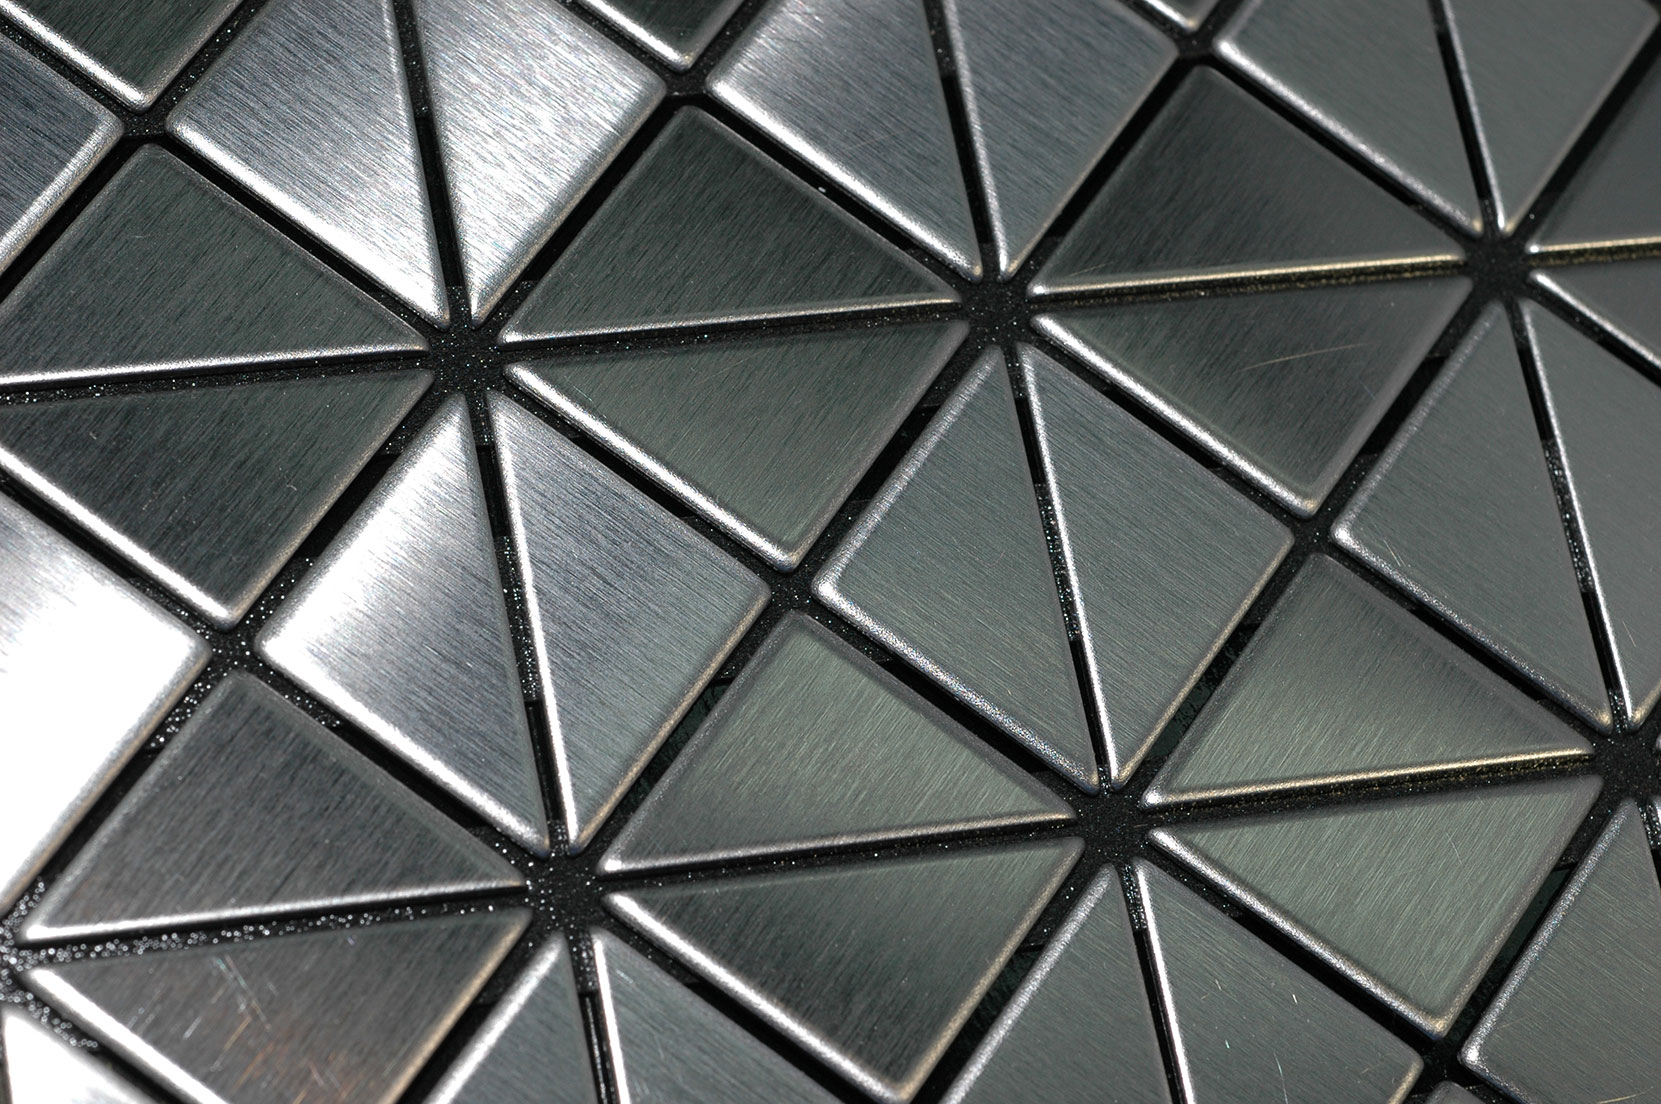 DECO Stainless Steel Brushed Tiles